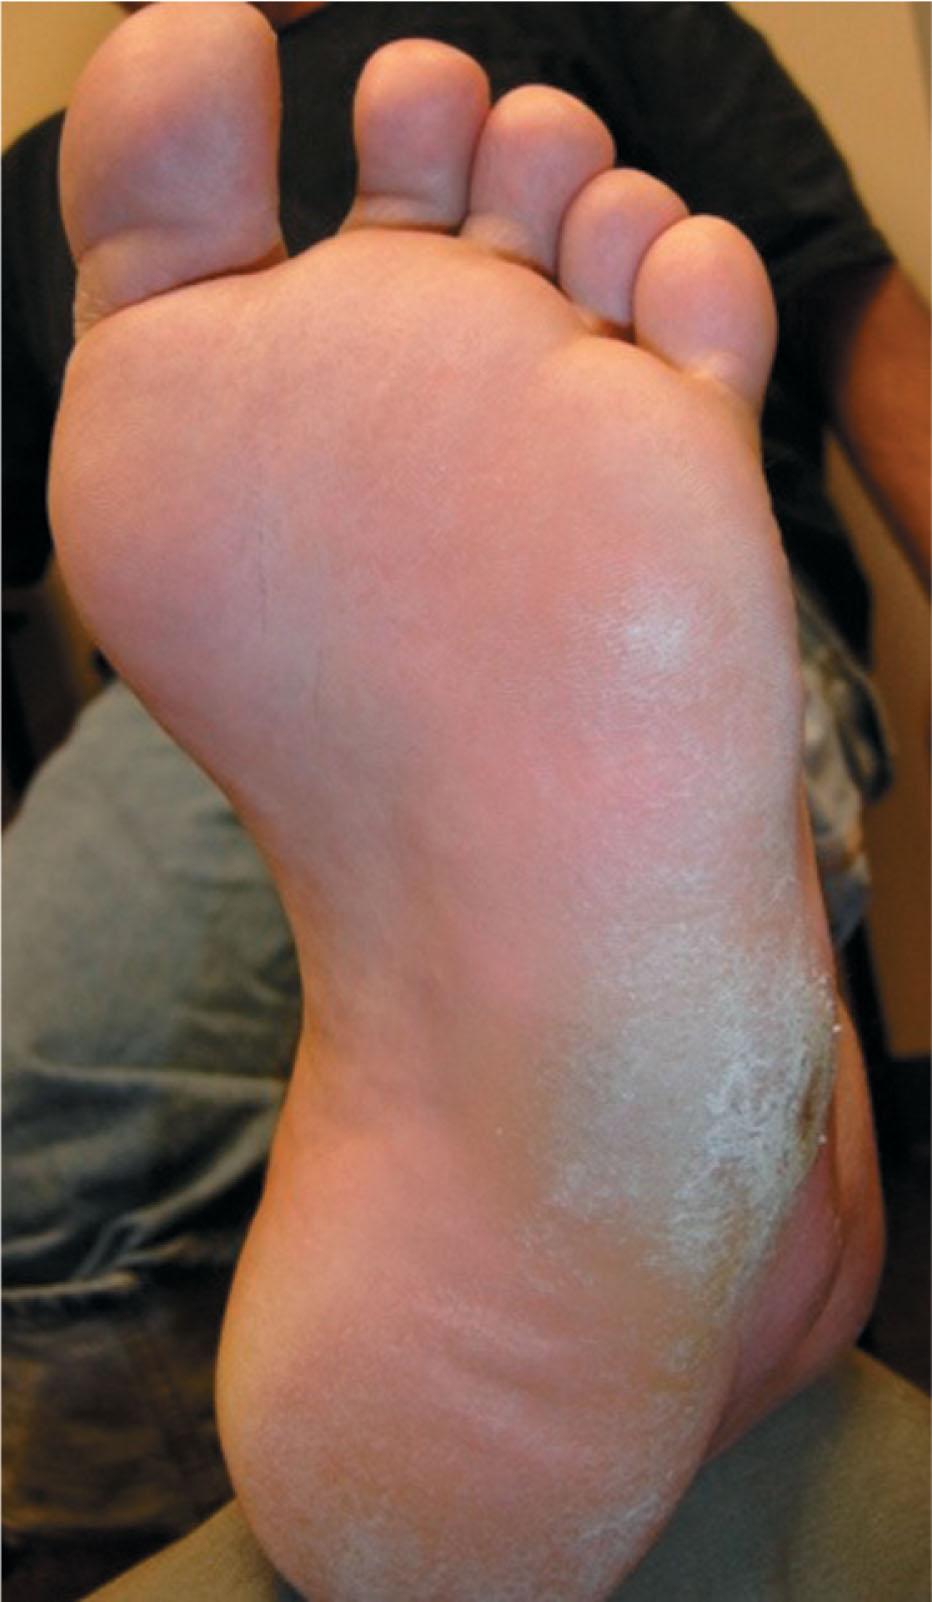 Fig. 19-3, Plantar view of a patient with Charcot-Marie-Tooth disease and associated sensory neuropathy with lateral midfoot ulceration secondary to lack of protective sensation and mechanical overload.